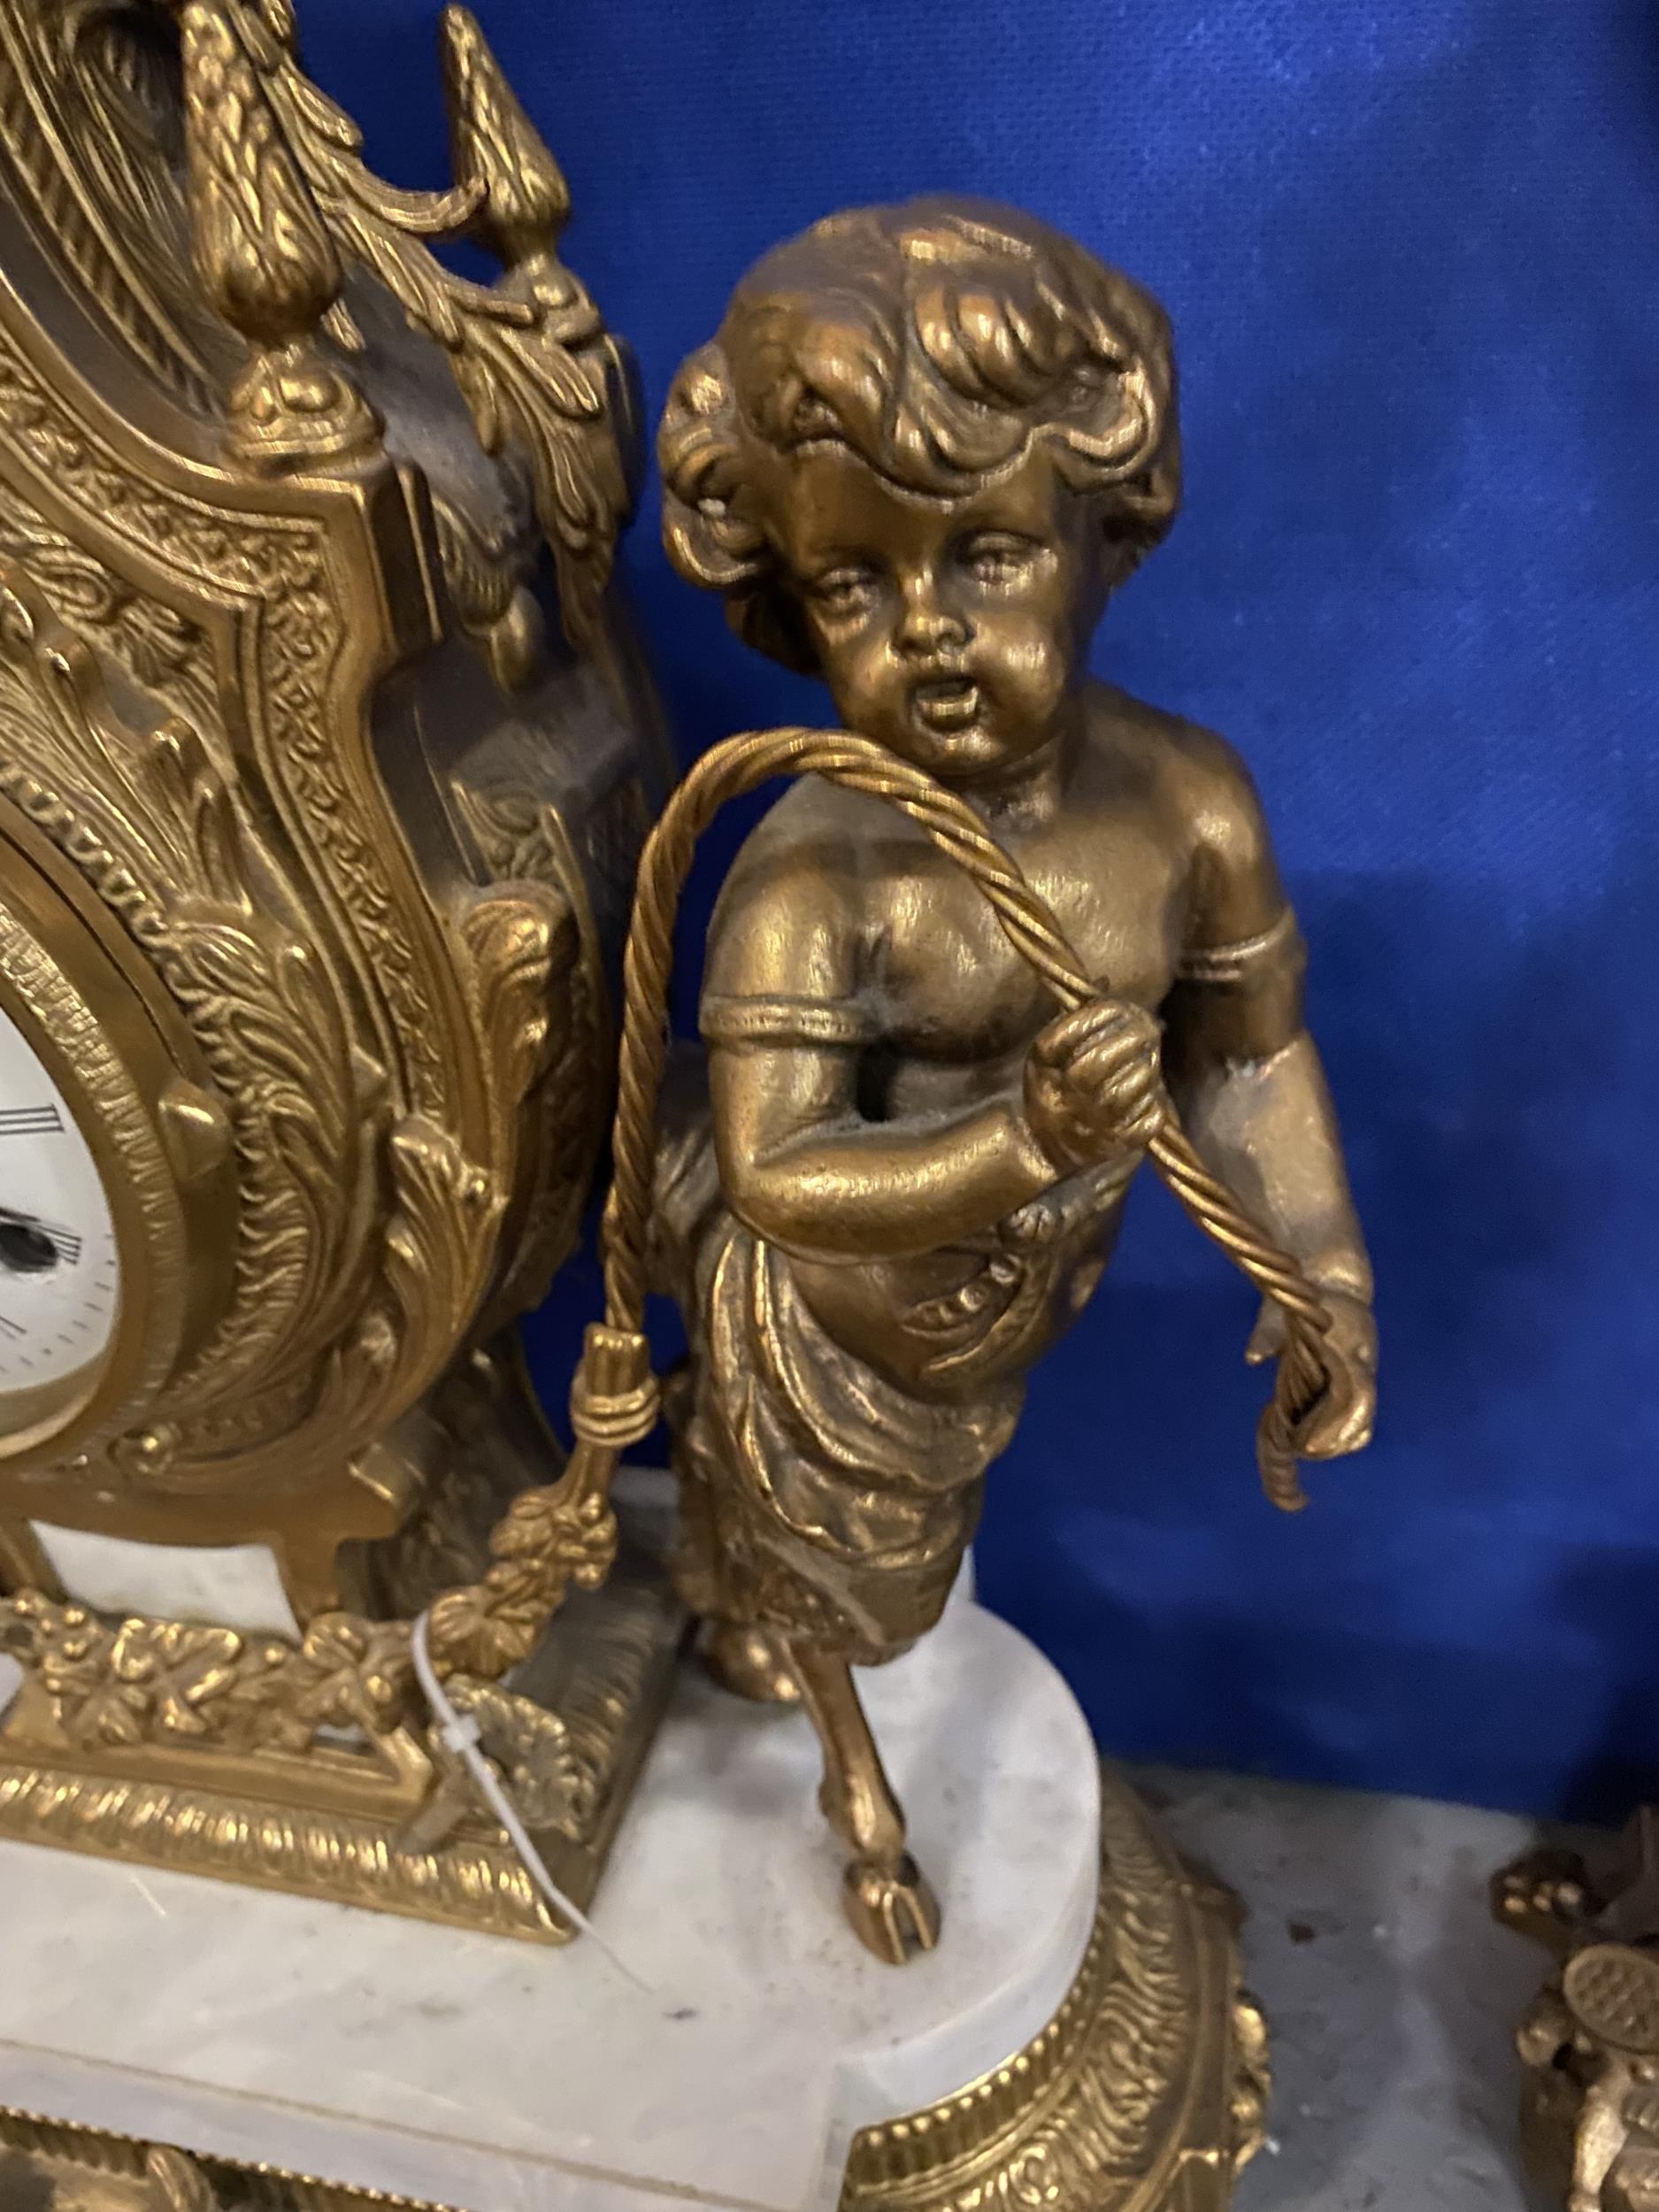 AN ORNATE IMPERIAL FRENCH GILT MANTLE CLOCK ON A MARBLE AND GILT BASE WITH CHERUB FAWN DECORATION - Image 4 of 10